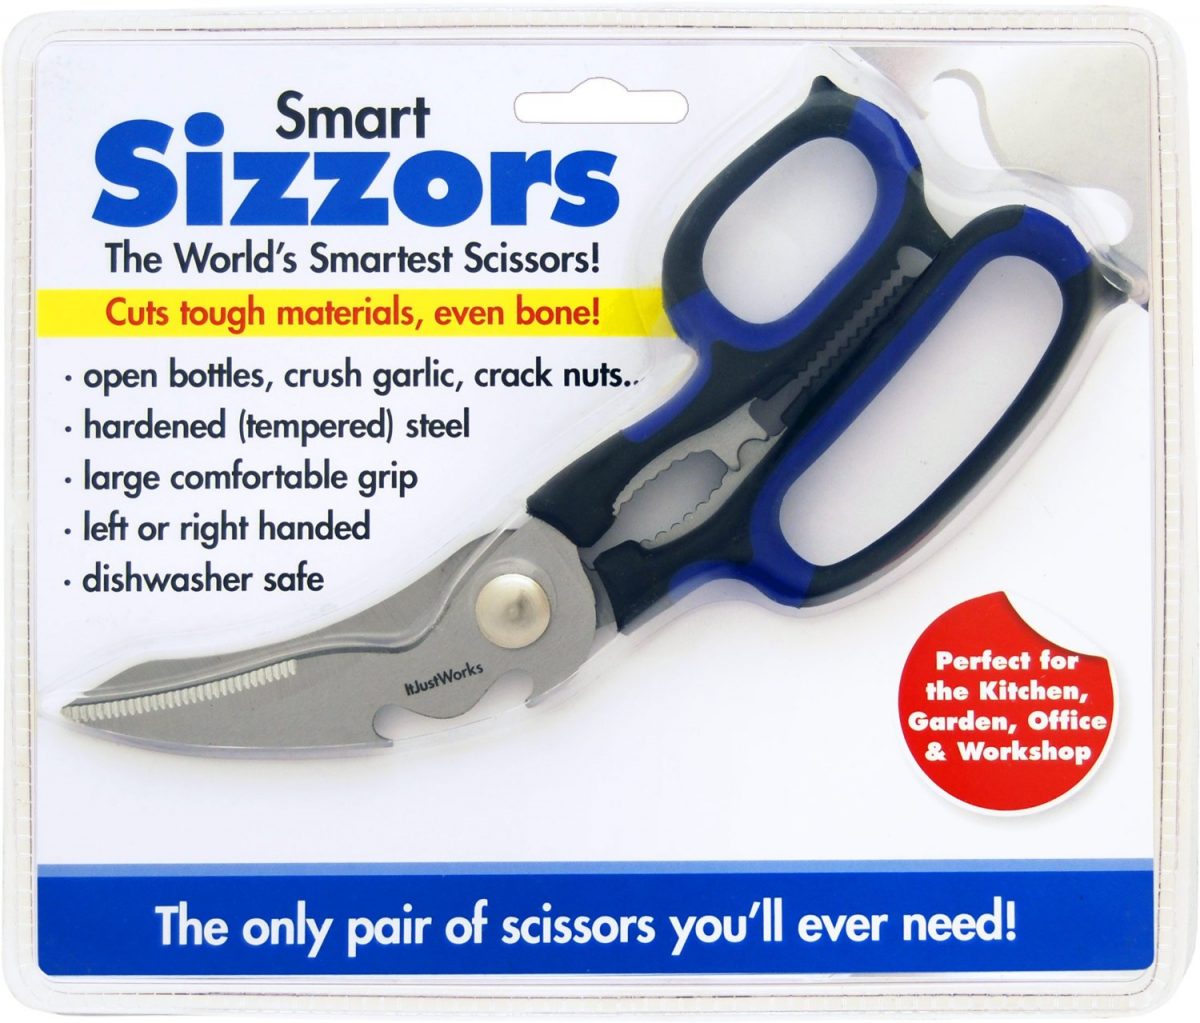 Smart Sizzors Are Like a Swiss Army Kitchen Knife